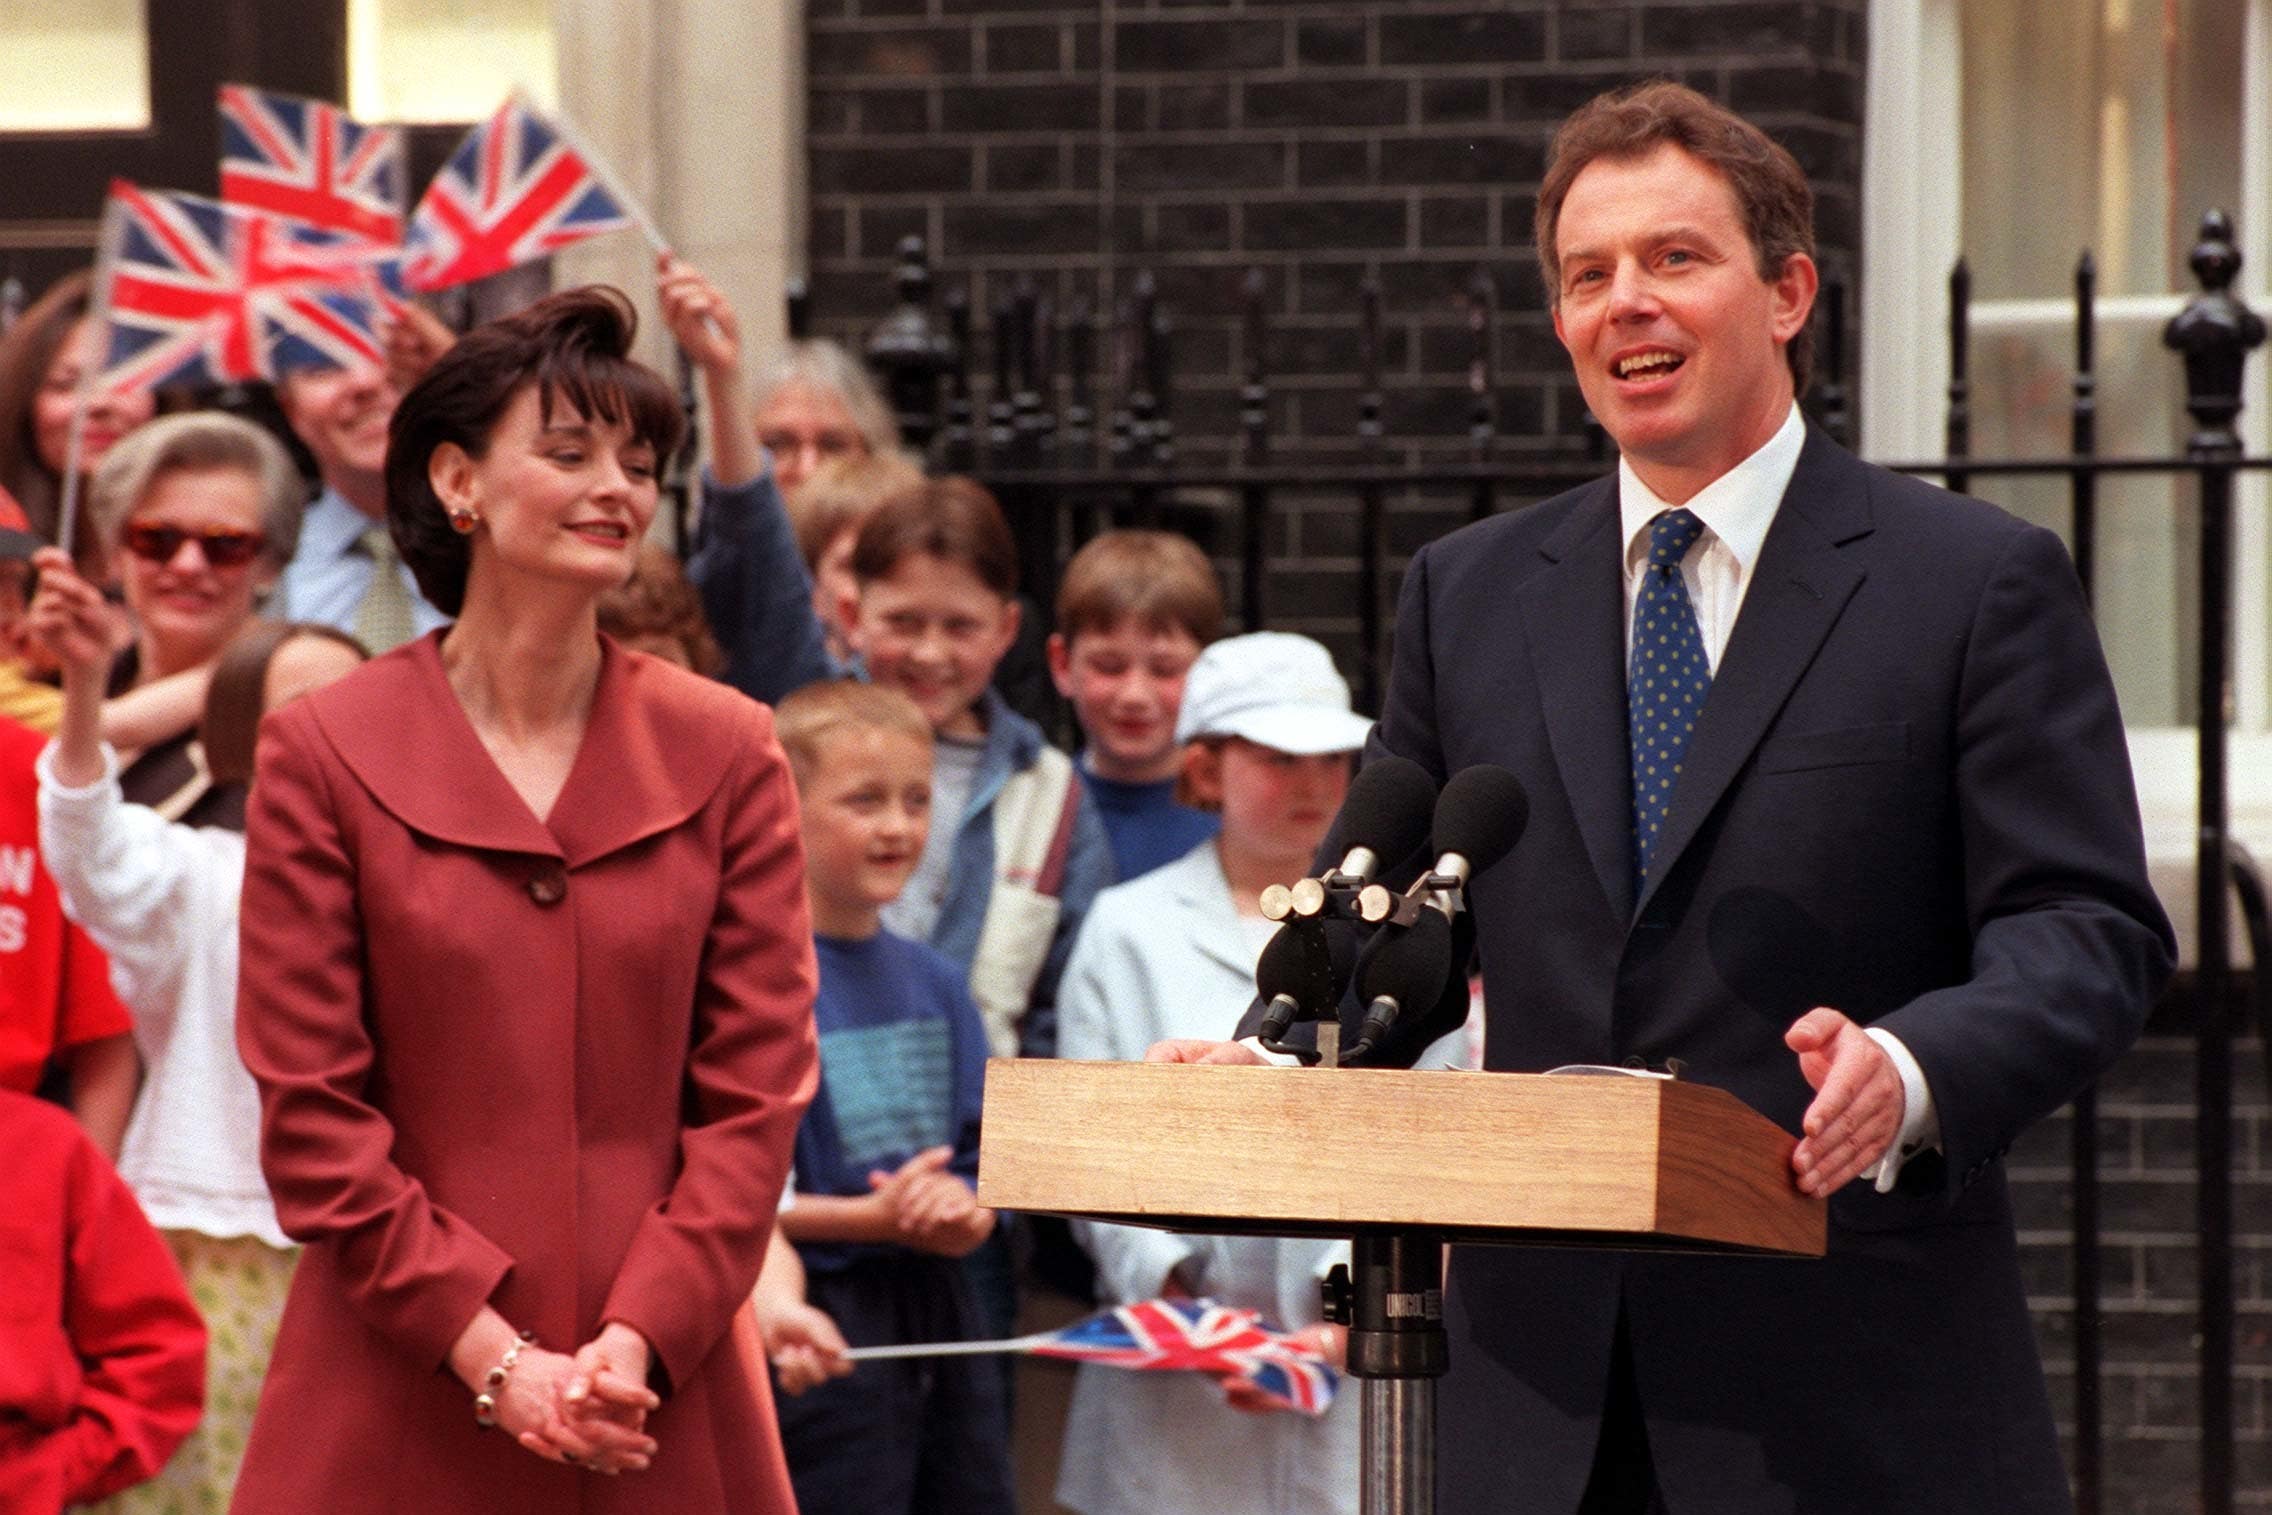 Tony Blair with wife Cherie after Labour’s 1997 landslide general election victory